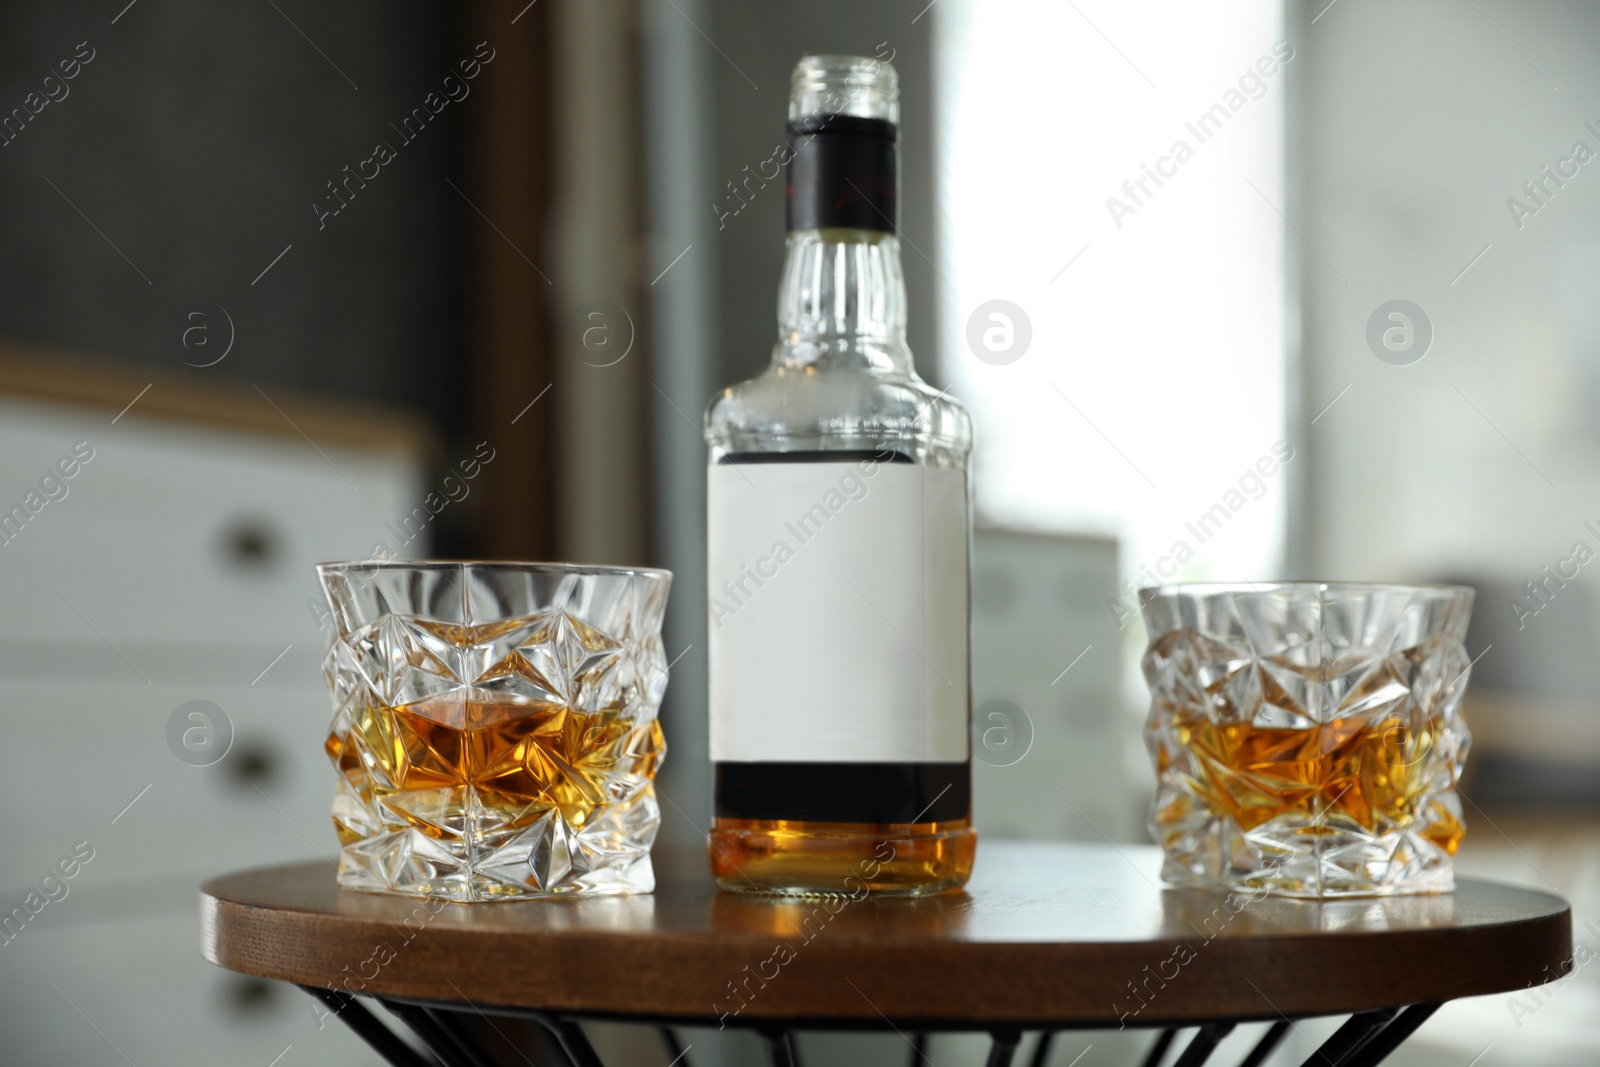 Photo of Glasses and bottle of whiskey on table indoors